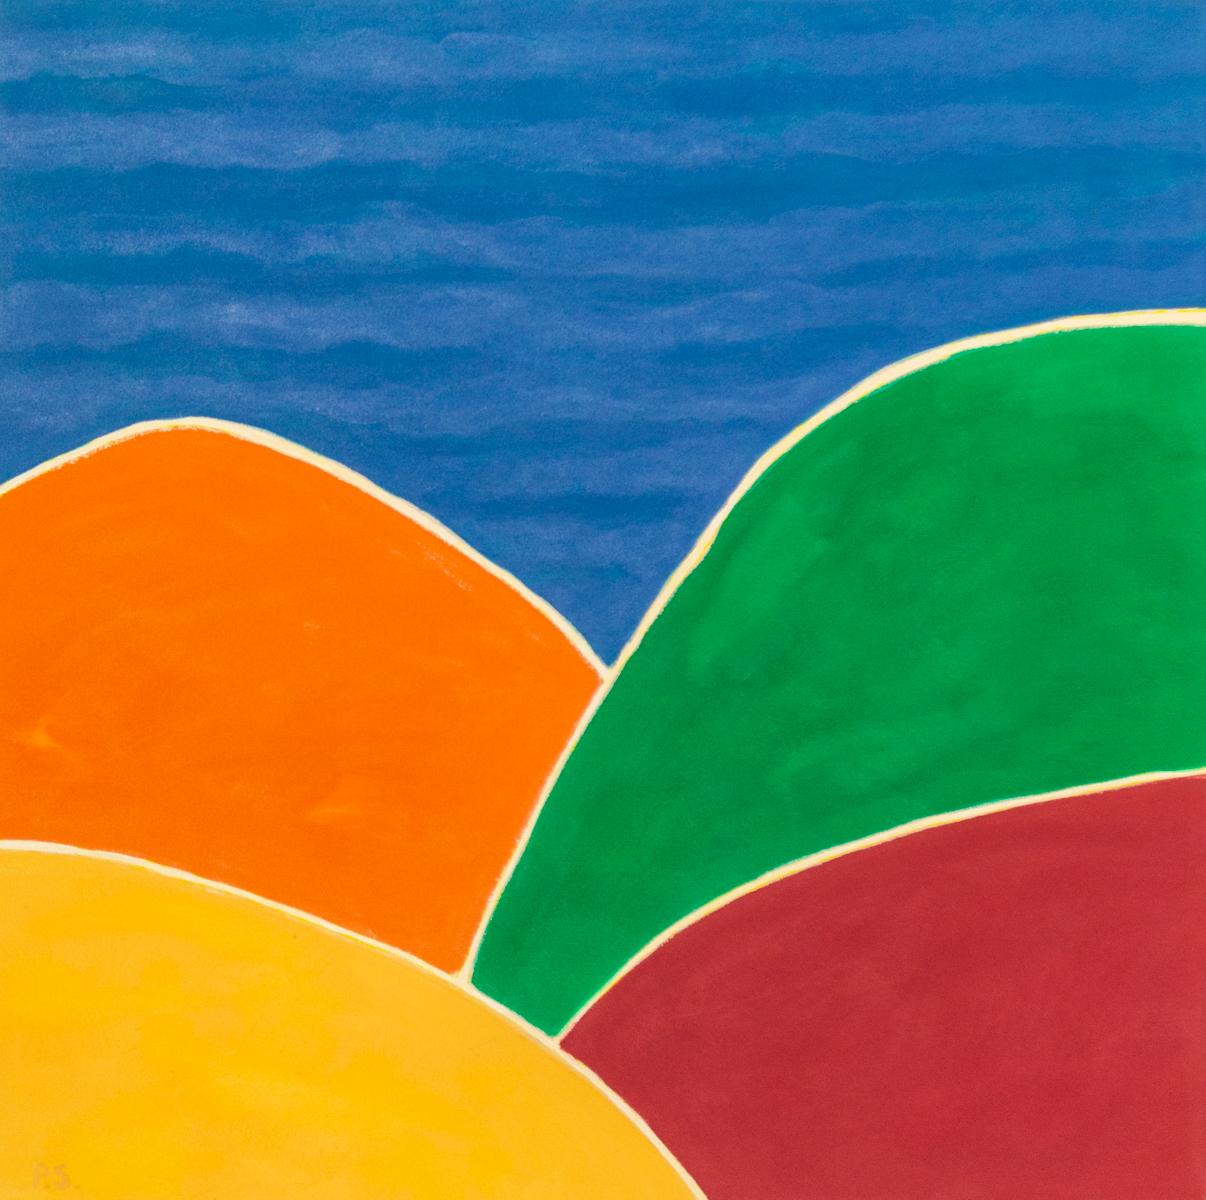 Pat Service Landscape Painting - Four Hills - vibrant, minimalist, abstracted landscape, acrylic on canvas